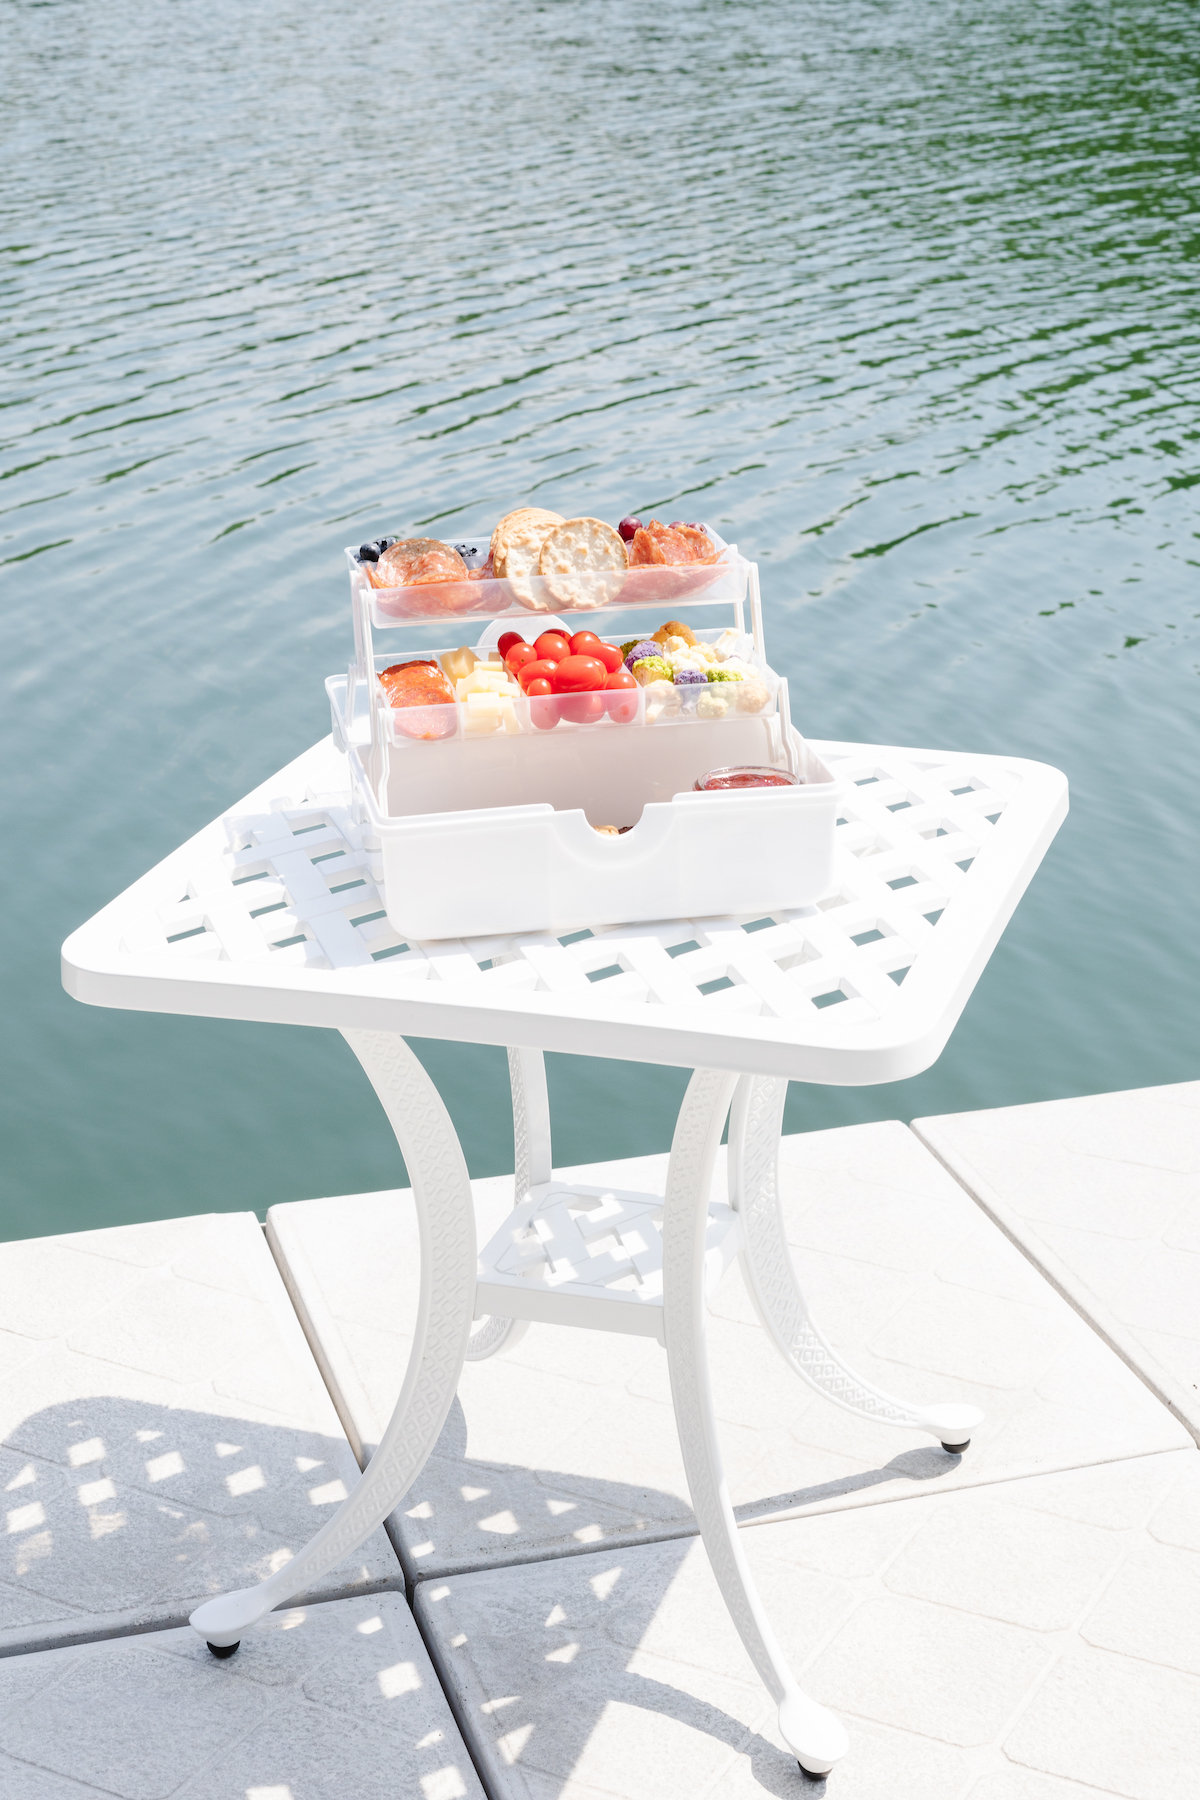 A snackle box on a white table with water in the background. 